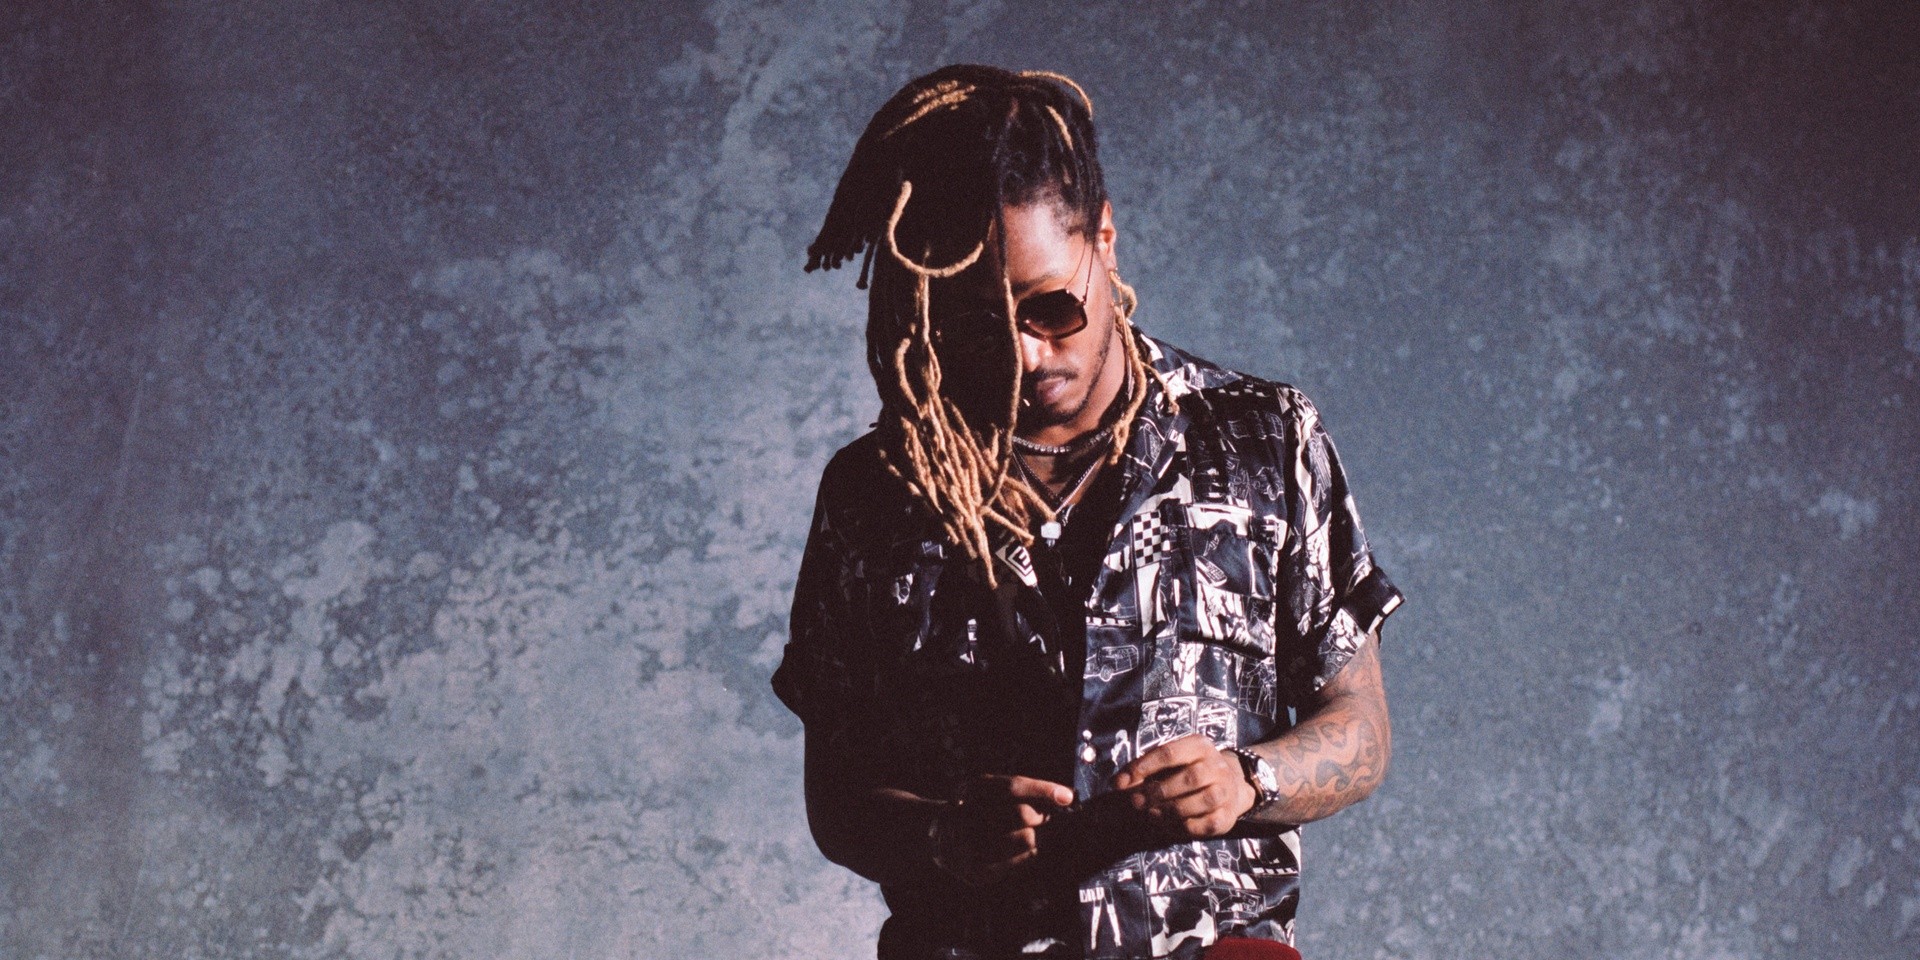 Future releases emotional new EP, Save Me – listen